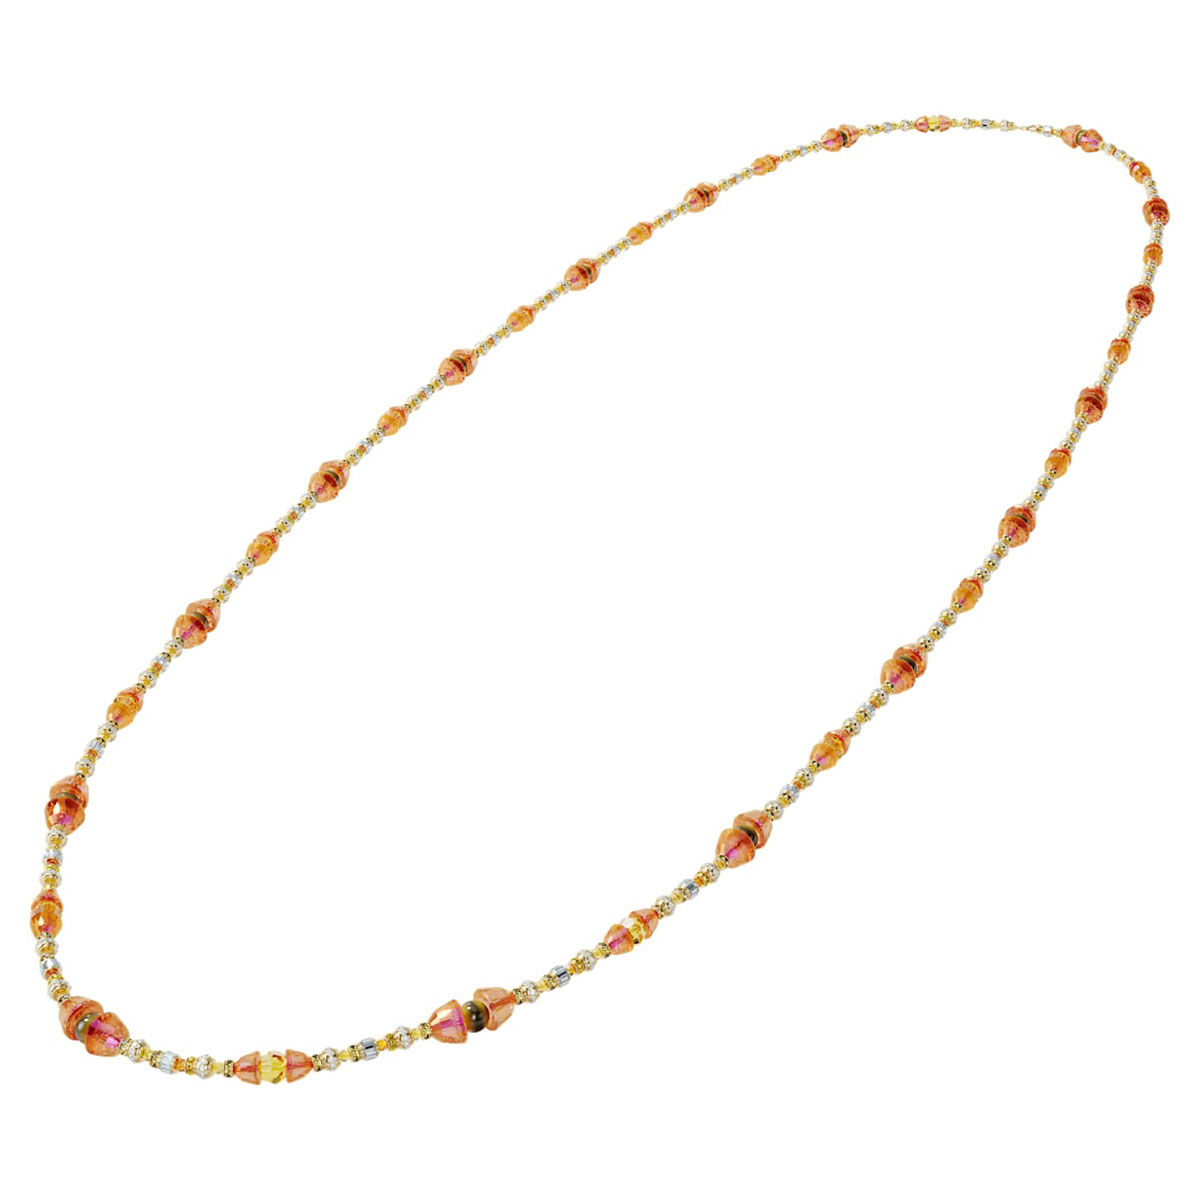 Swarovski Somnia Necklace, Extra Long, Brown, Gold-Tone Plated